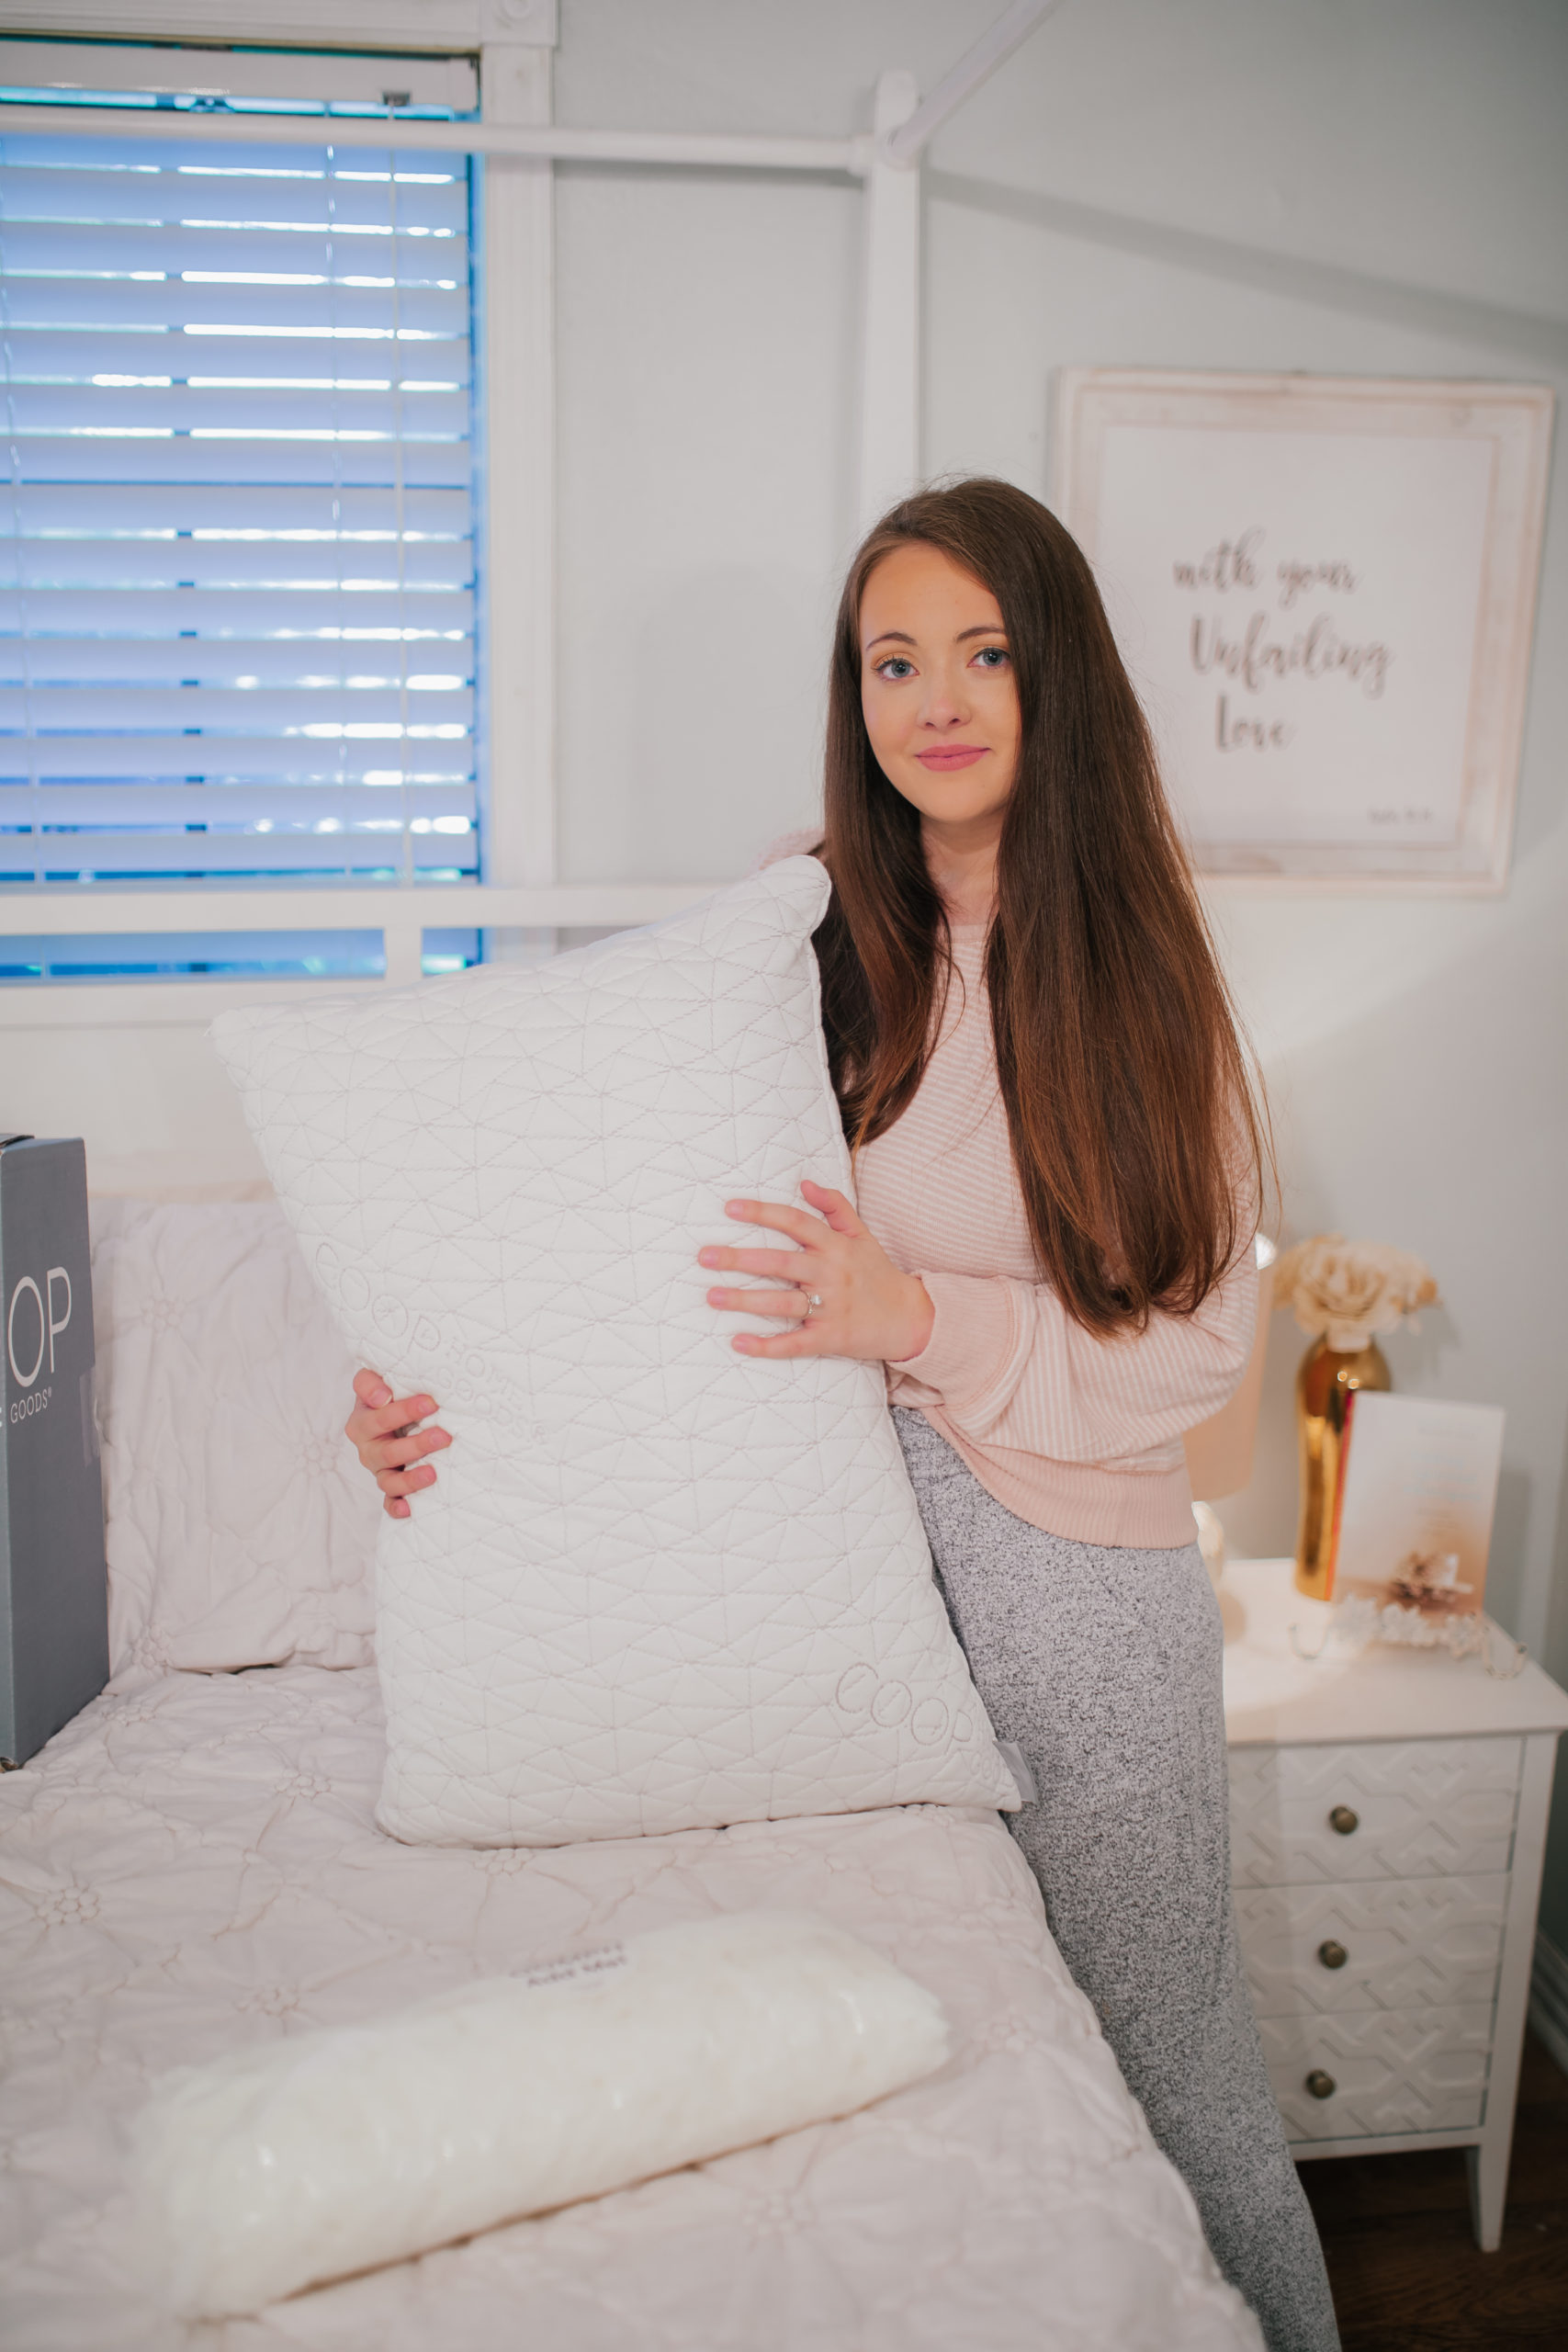 How This Adjustable Pillow Is Improving My Sleep!